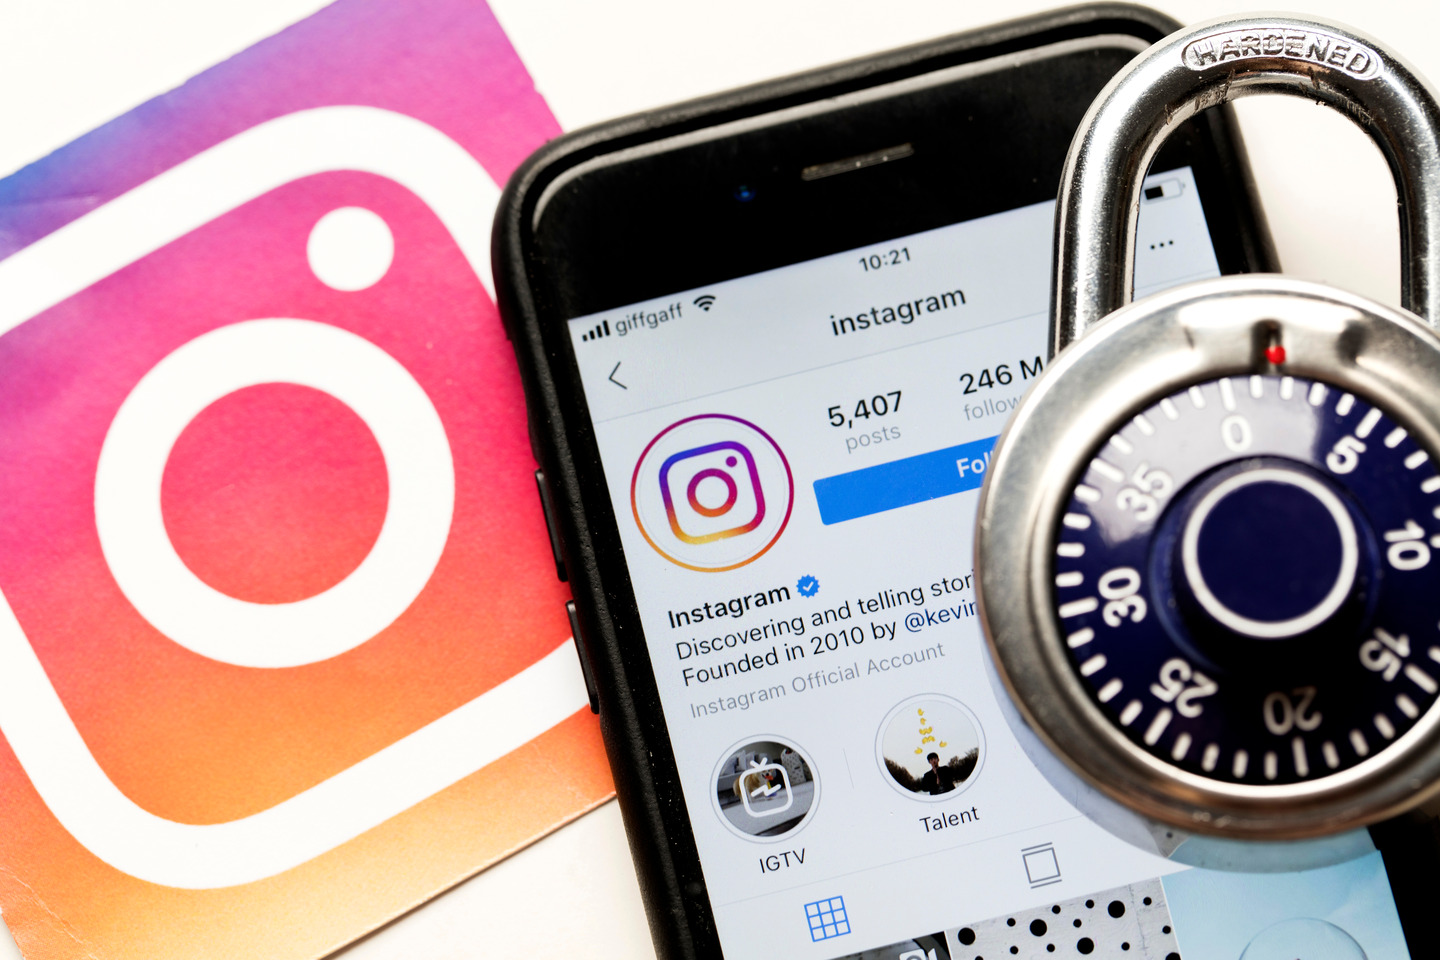 Instagram gets a big fine over data privacy